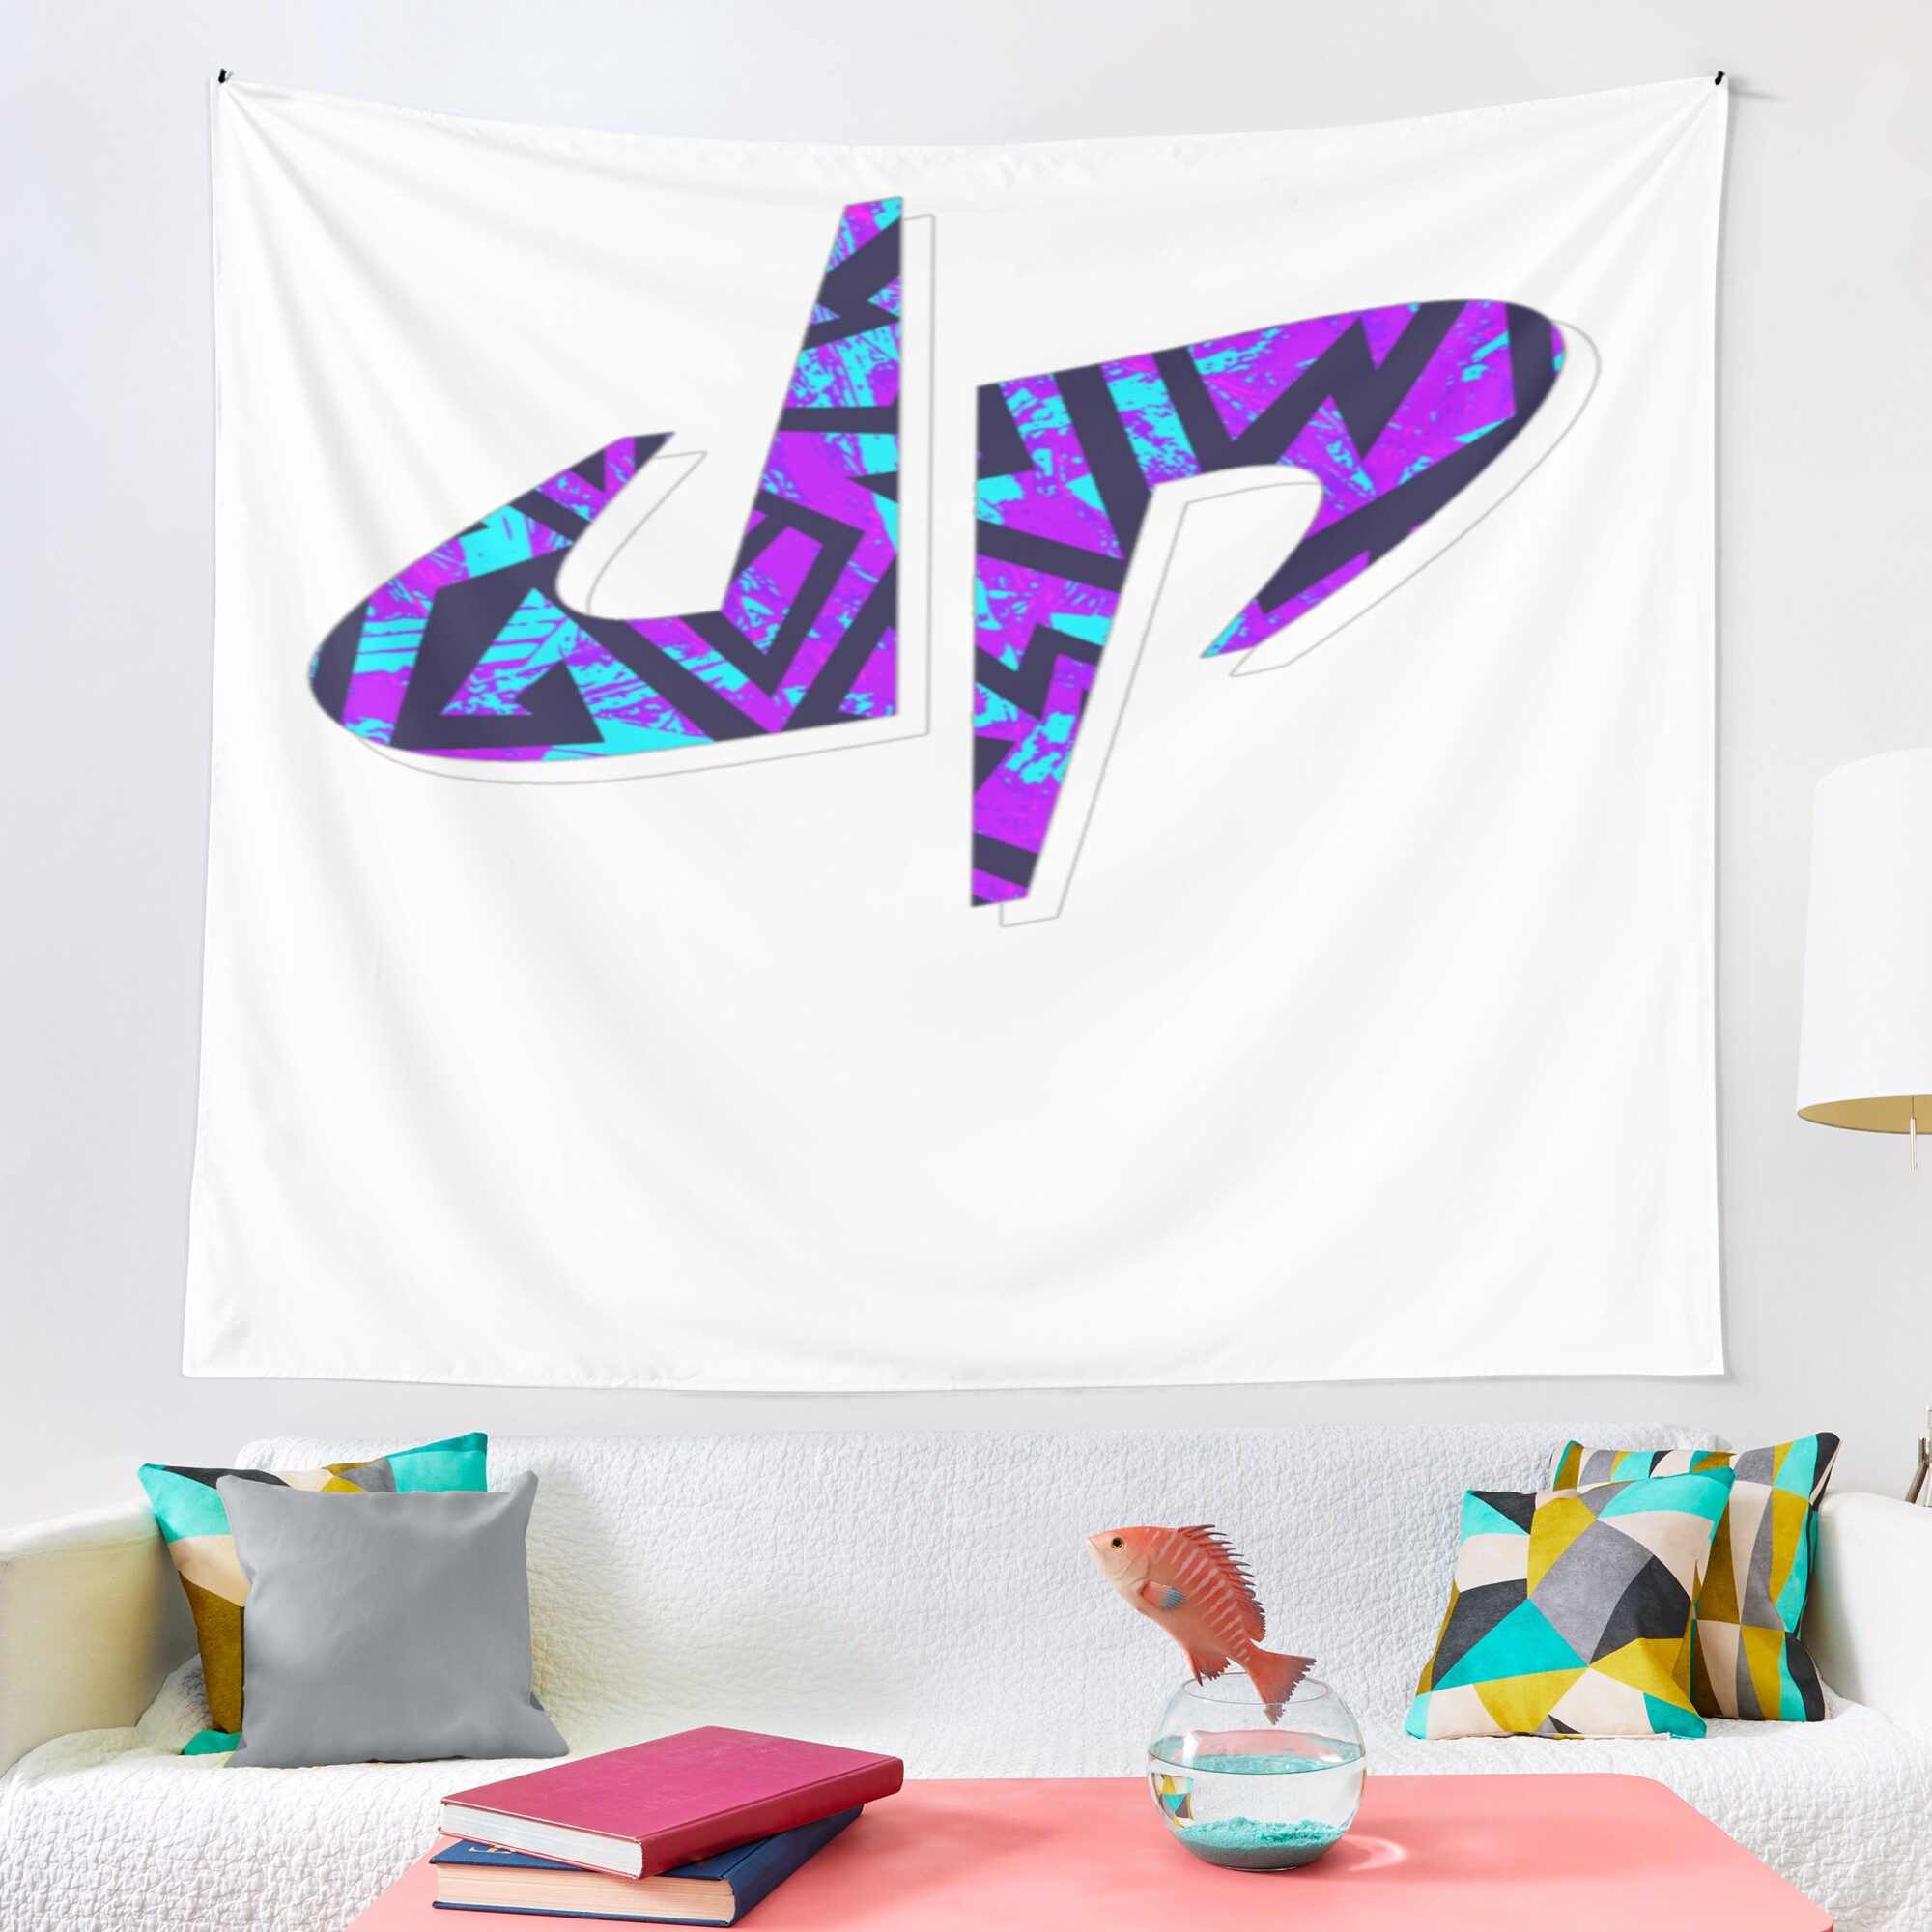 urtapestry lifestyle largesquare2000x2000 16 - Dude Perfect Merch